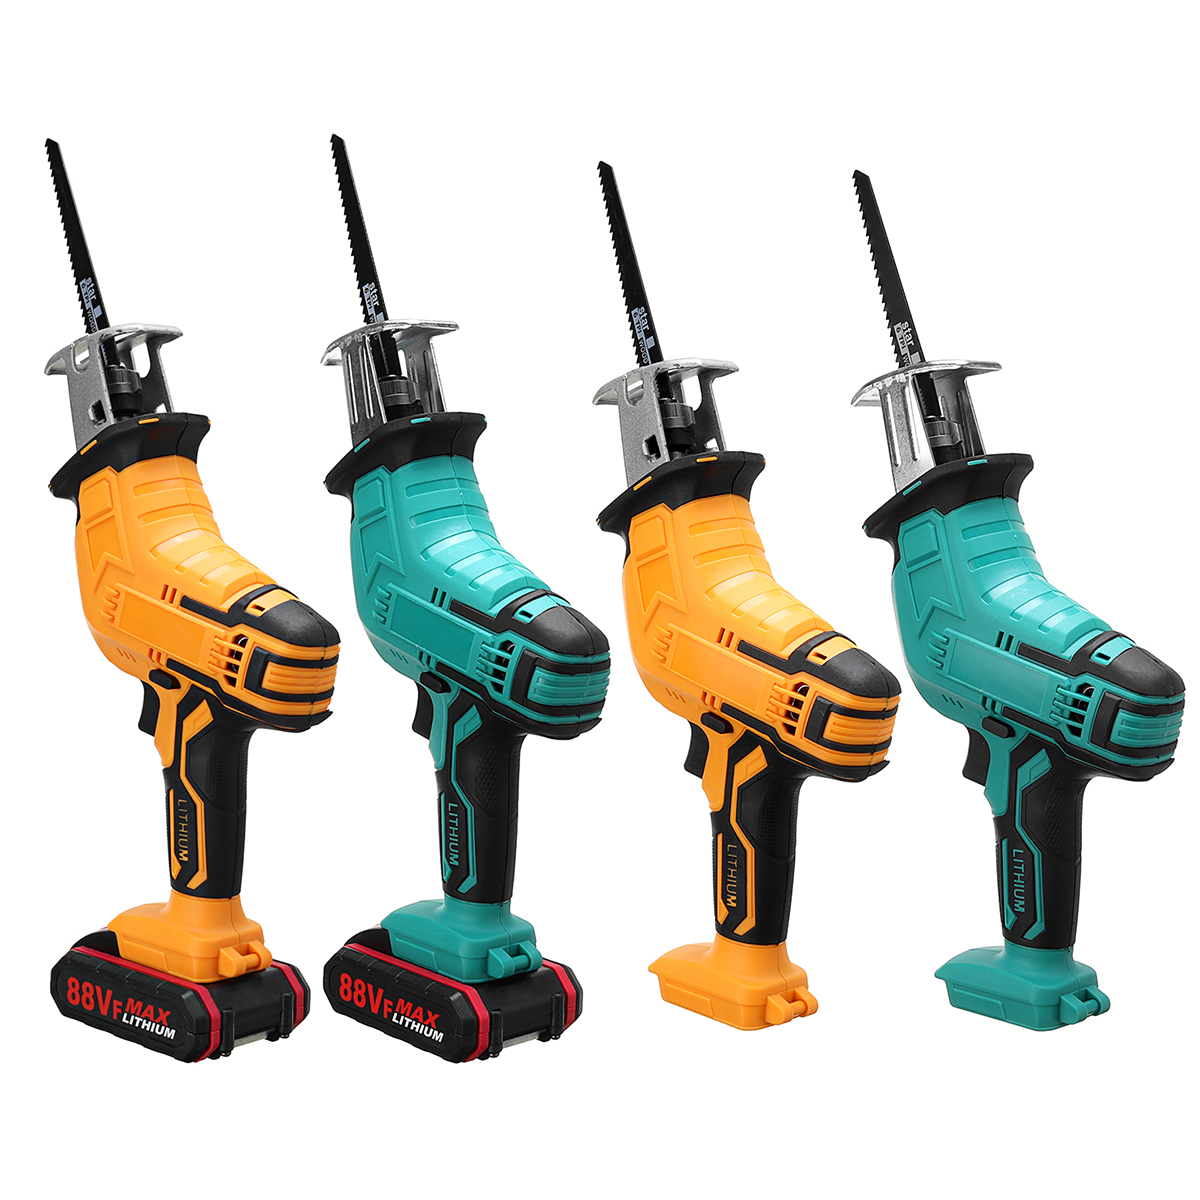 Rechargeable-Cordless-Reciprocating-Saw-Handheld-Woodorking-Wood-Cutter-W-None12-Battery--4PCS-Saw-B-1879912-11